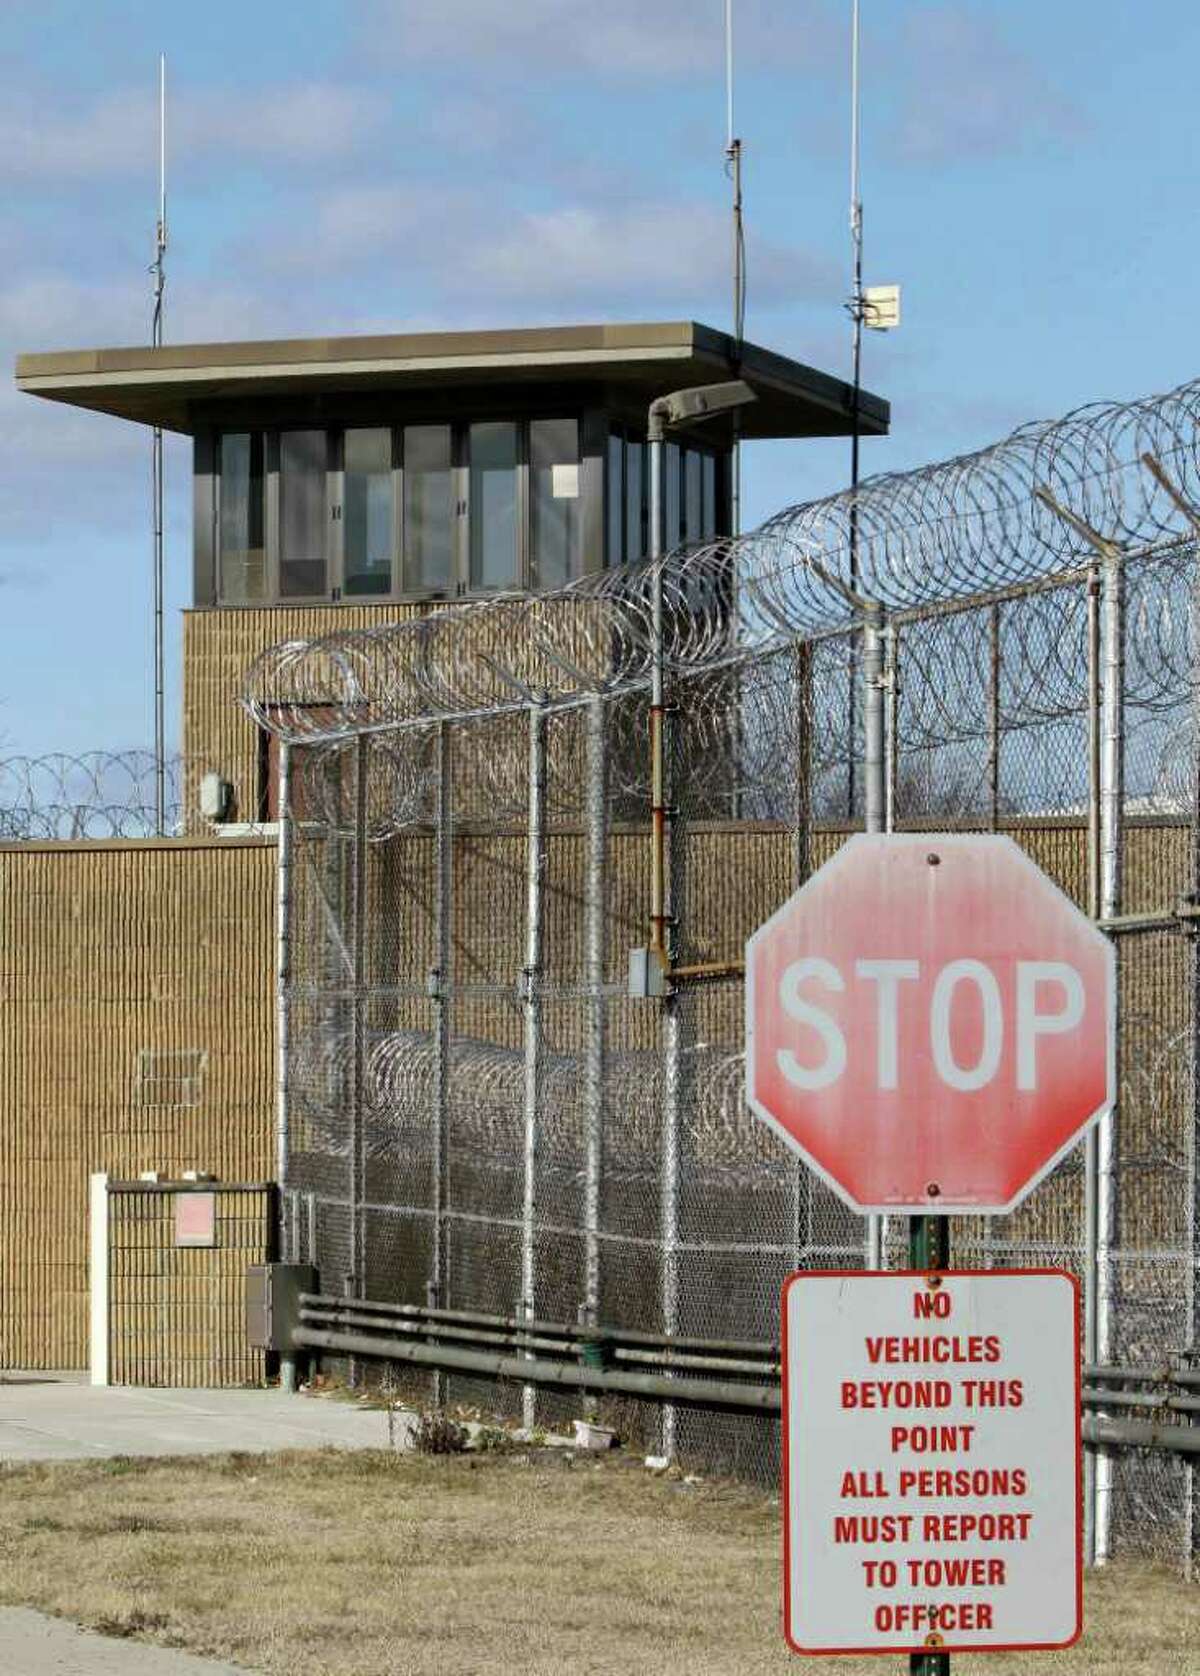 The guard tower is shown at the Arthur Kill Correctional Facility on Staten Island in New York, Tuesday, Jan. 3, 2012. The correctional center is the seventh prison, camp, or work release facility shuttered in 2011 as New York transferred about 2,600 inmates and 1,400 staff to its 60 remaining penal units in an effort to save millions of dollars and remove excess capacity. (AP Photo/Kathy Willens)